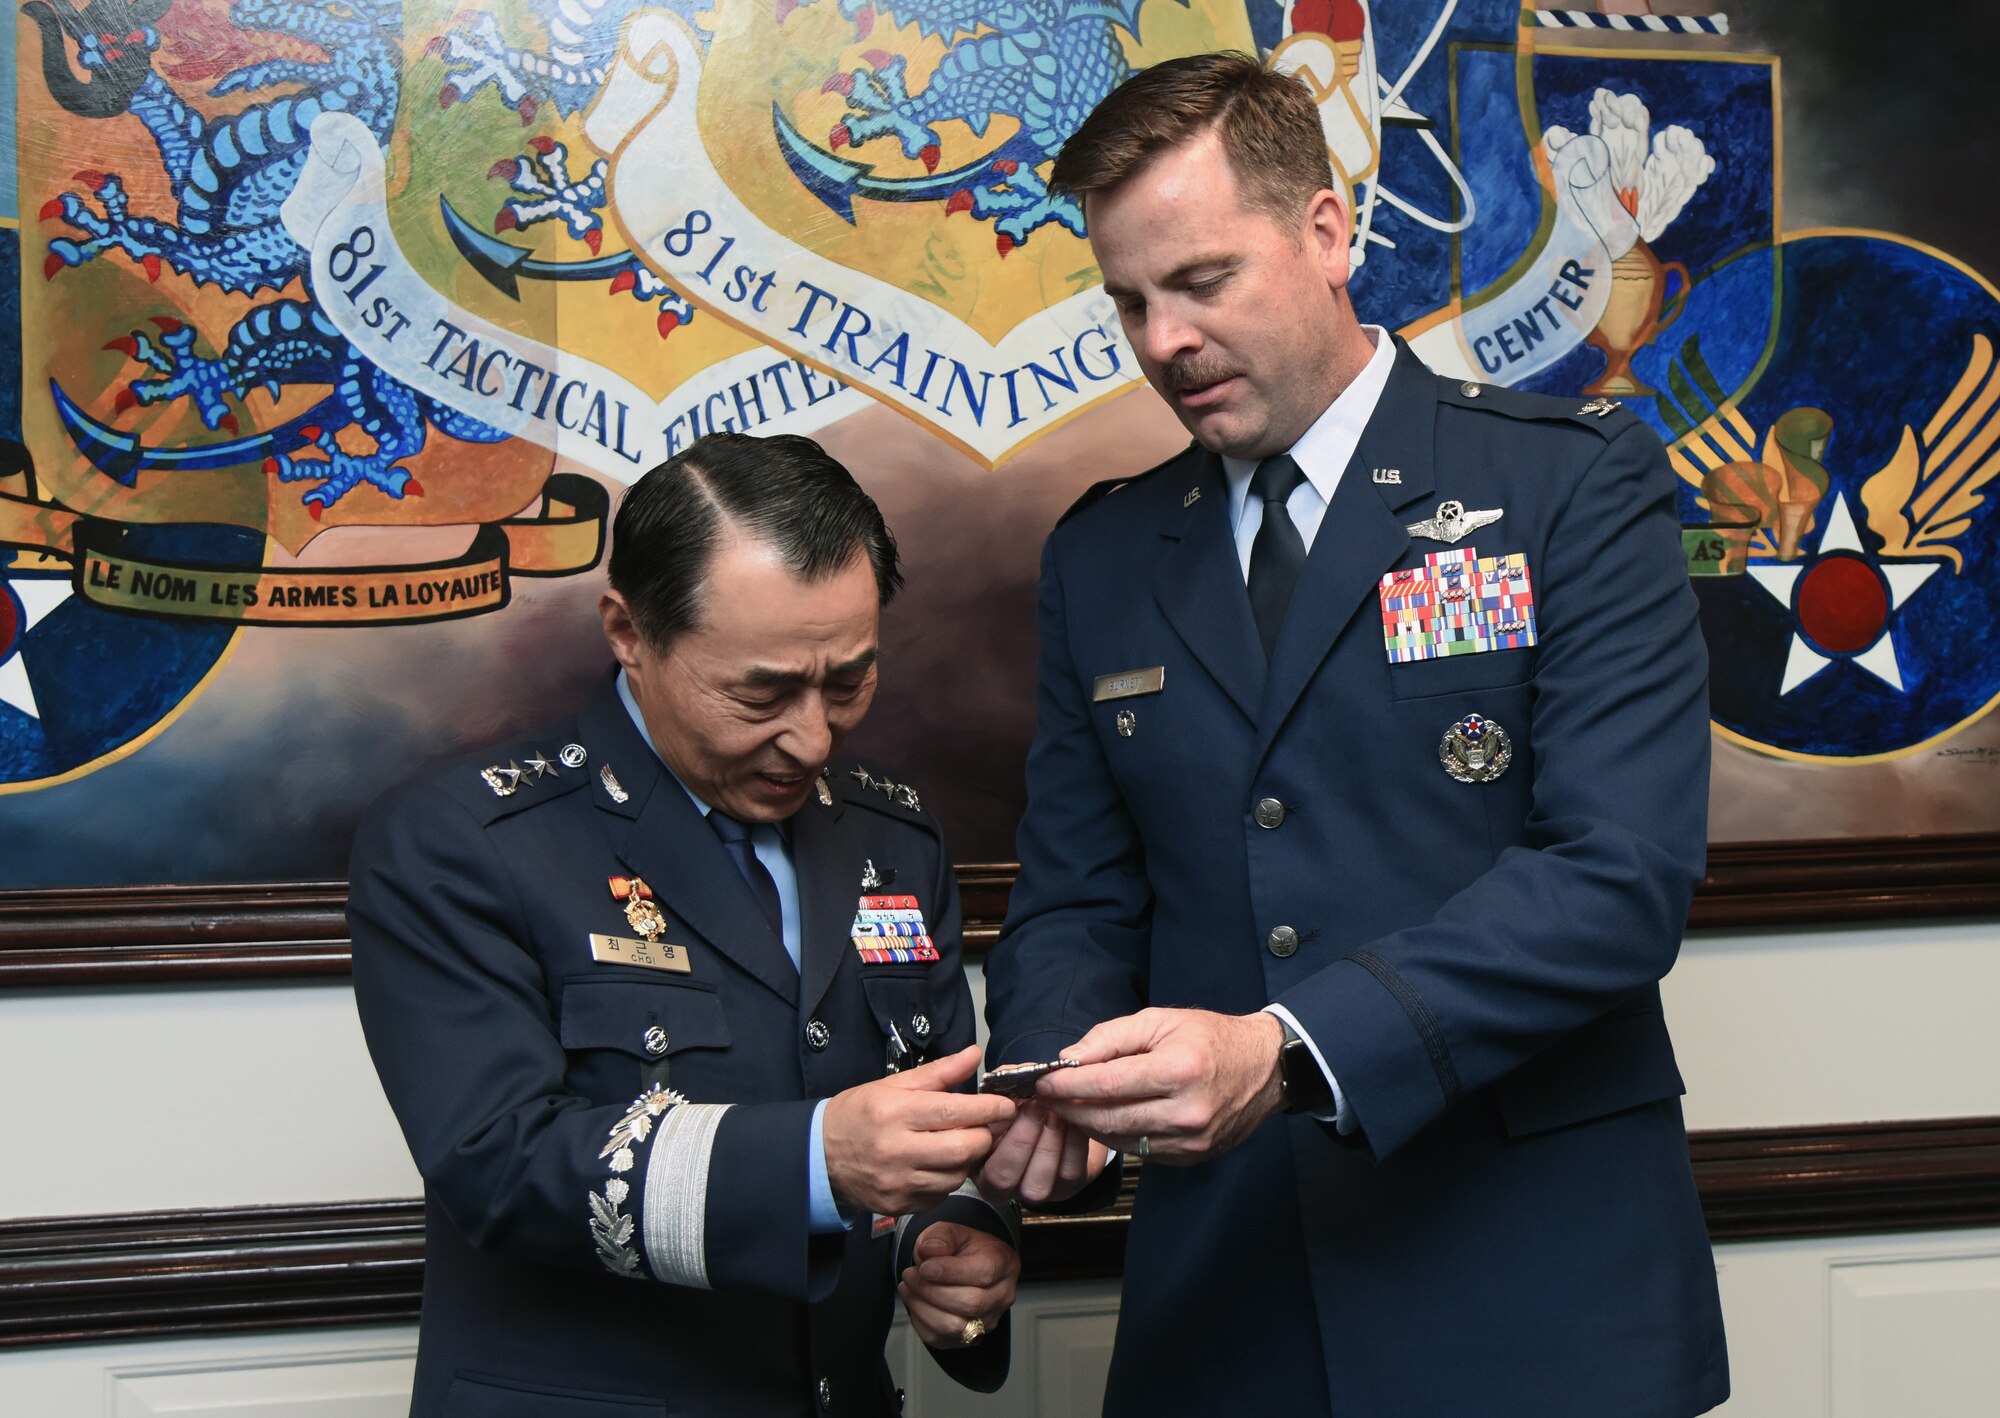 U.S. Air Force Col. Lance Burnett, 81st Training Wing vice commander, presents a coin to Republic of Korea Air Force Maj. Gen. Geunyoung Choi, ROKAF Air Education and Training Command commander, following an 81st TRW mission brief at the headquarters building on Keesler Air Force Base, Mississippi, March 22, 2019. Choi visited Keesler to help better develop ROKAF technical education through visiting U.S. Air Force future technology education sites.  (U.S. Air Force photo by Kemberly Groue)